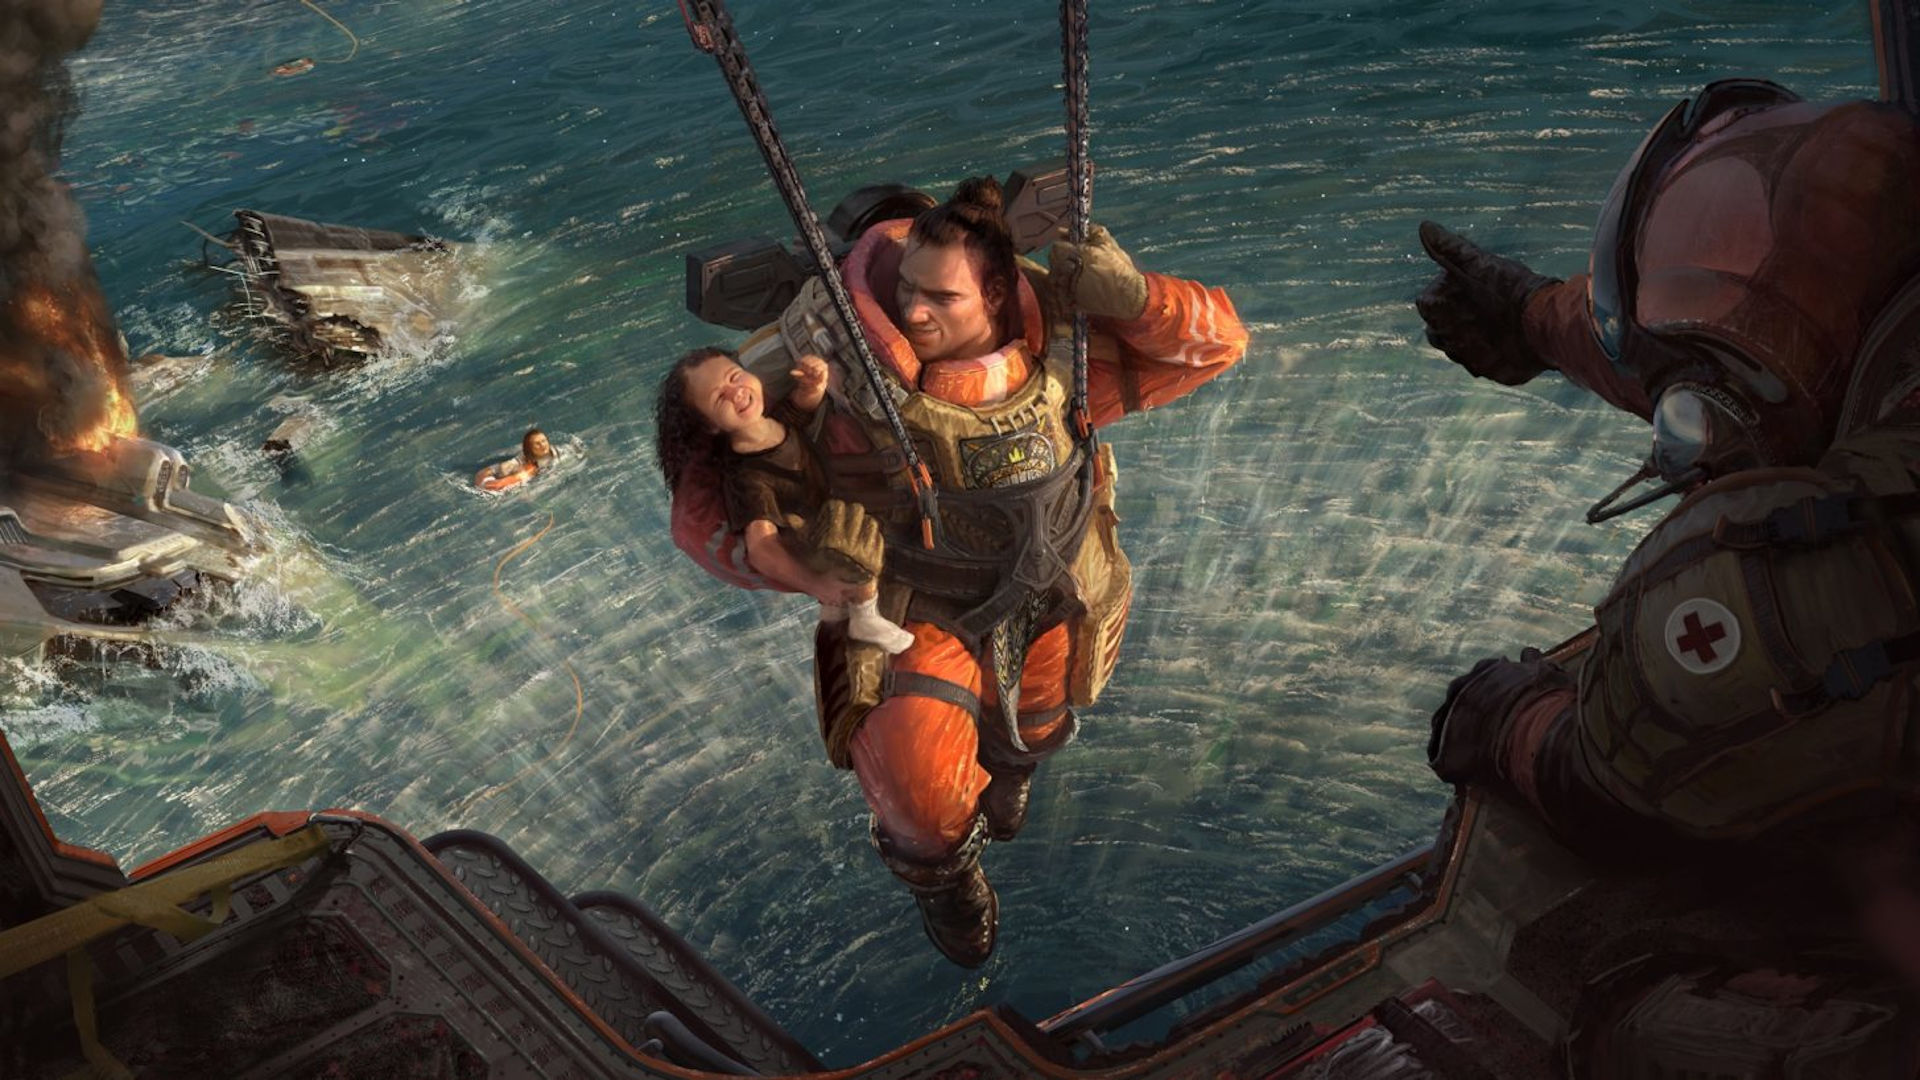 Gibraltar from Apex Legends rescues a little girl